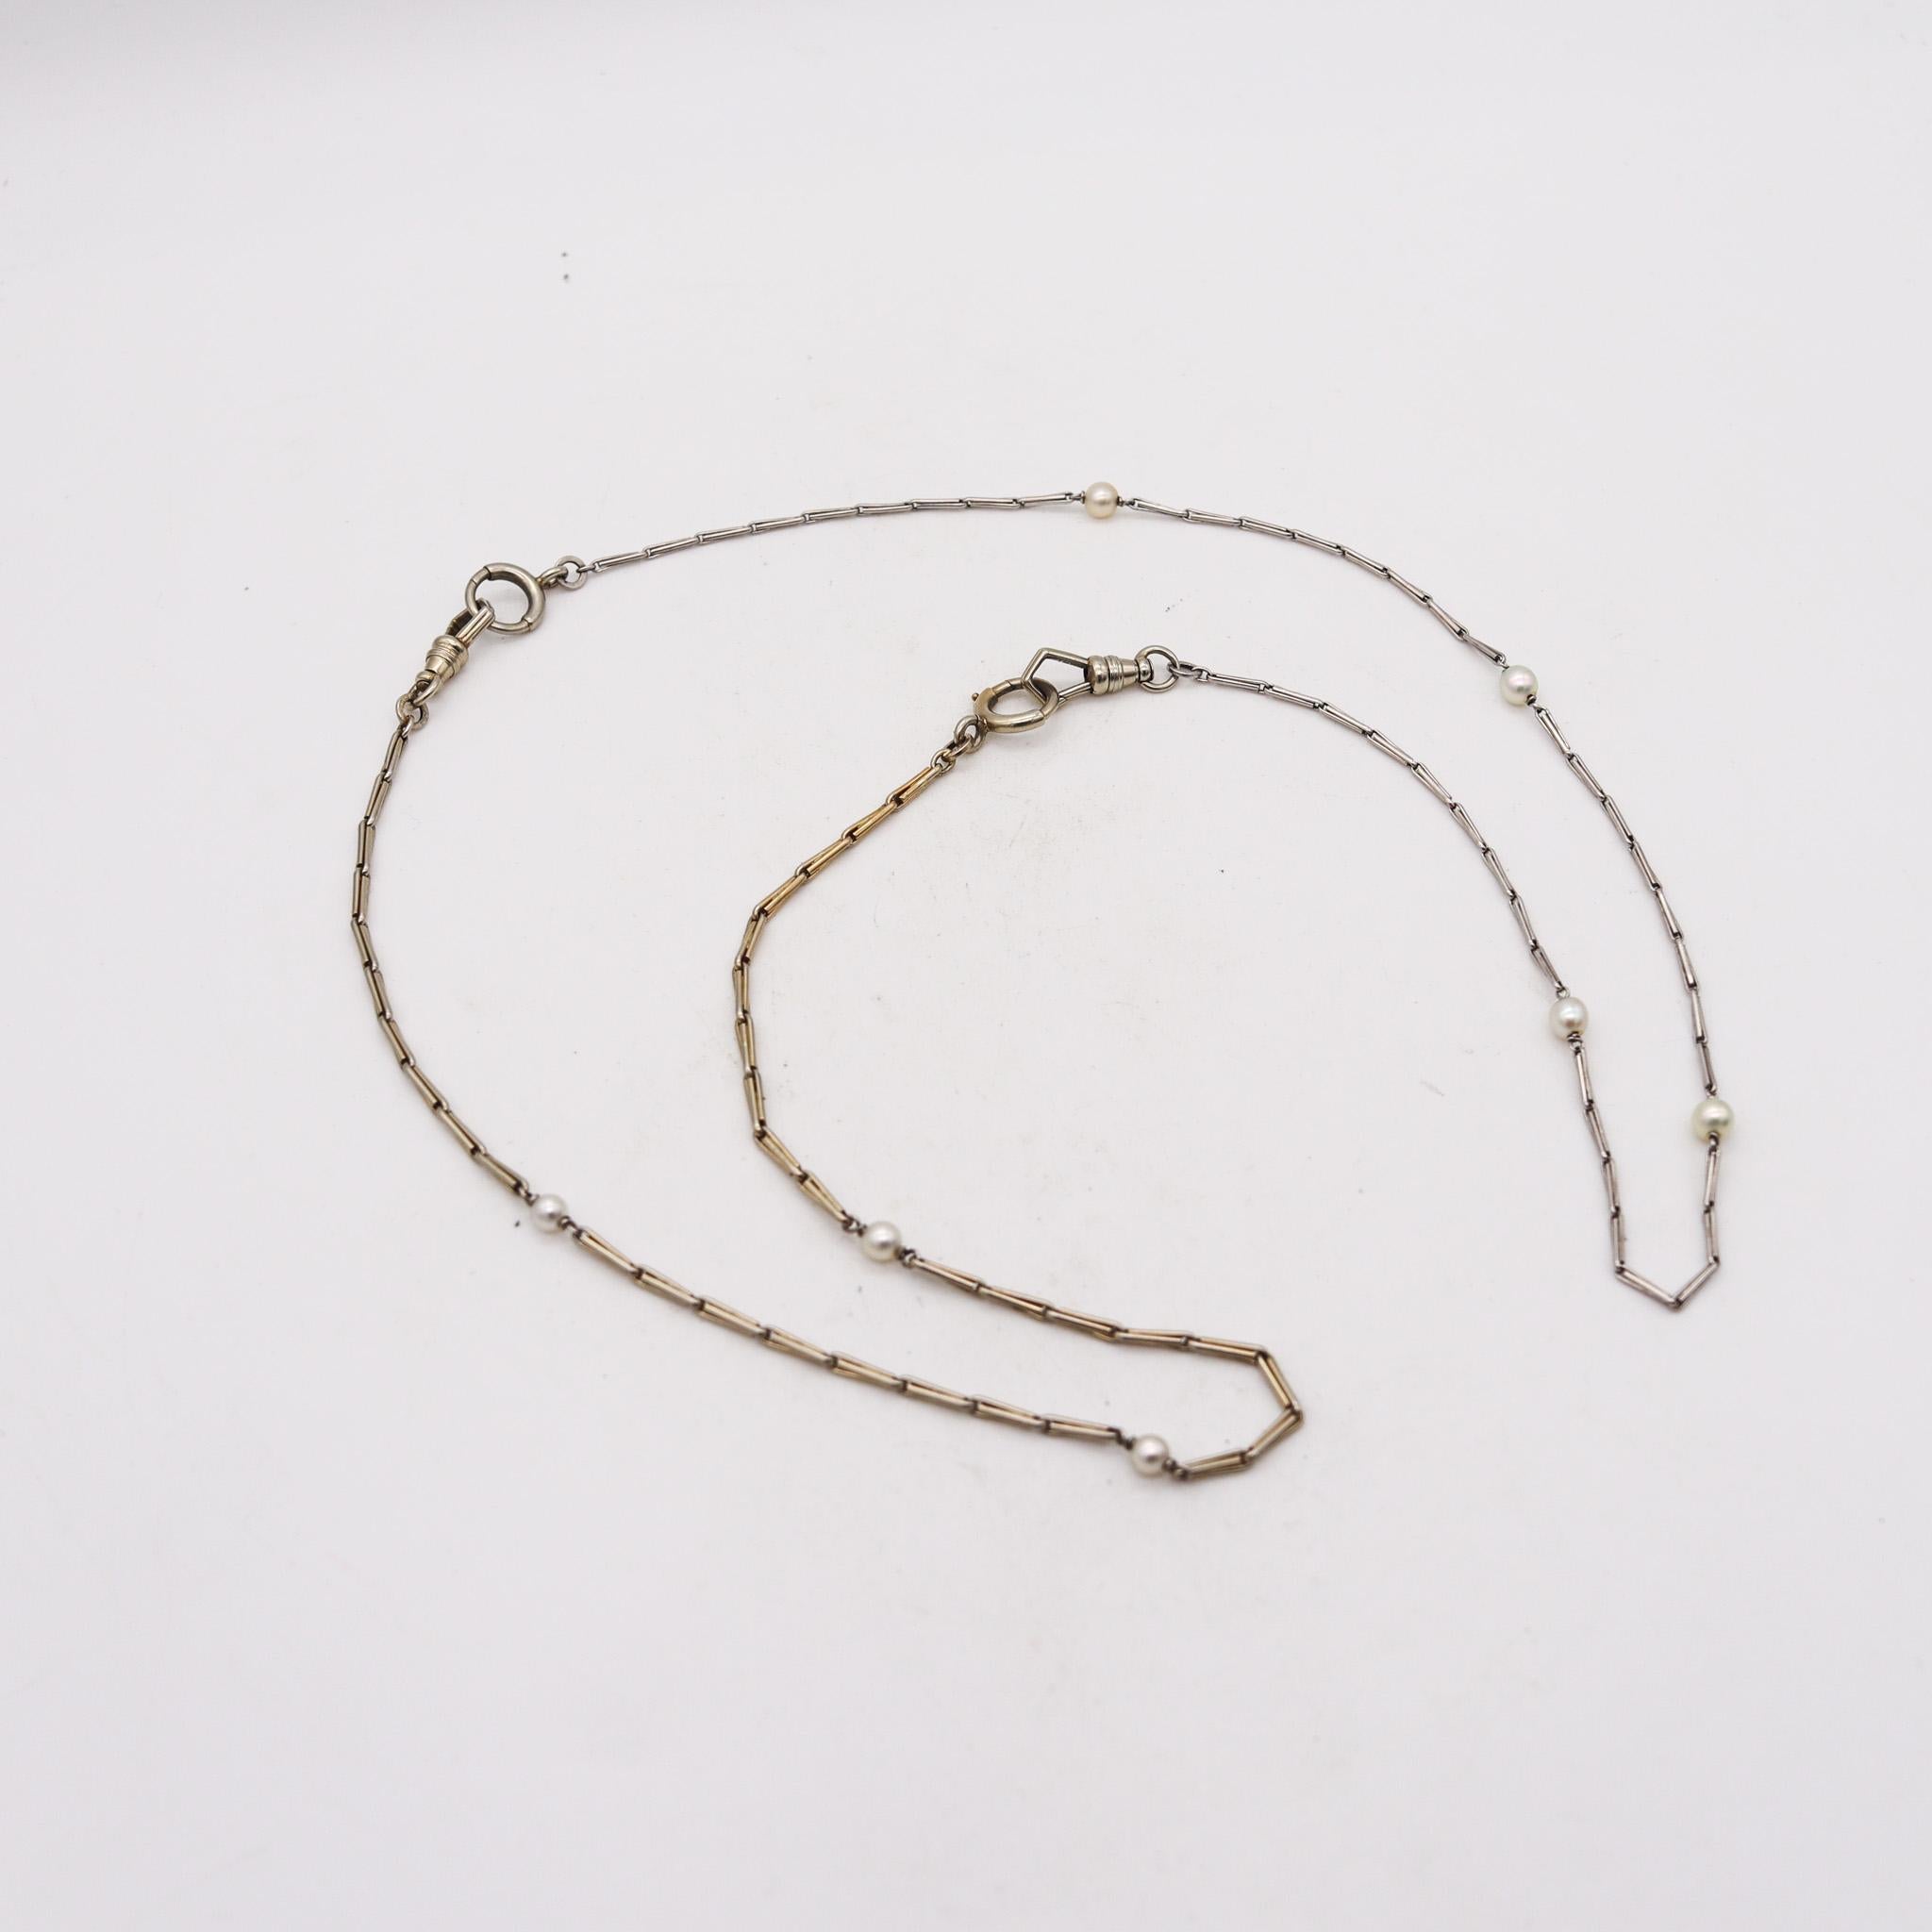 Convertible necklace designed by Jacques Kreisler & Co.

A converted double chained  necklace, created during the art deco period in New York by Kreisler Company. They were crafted around the 1925, with intricated links in solid white gold of 18